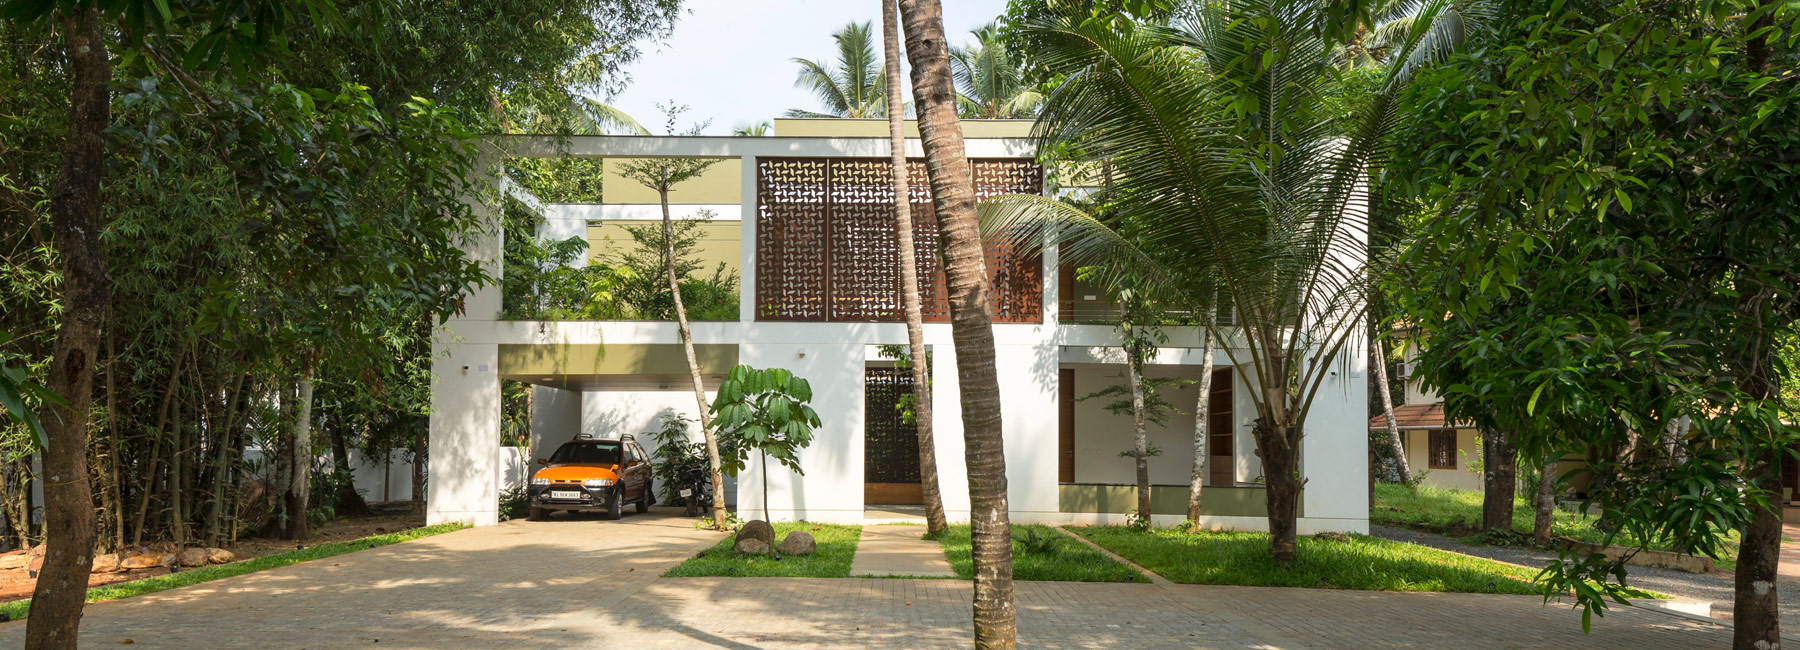 in india, LIJO RENY's 'regimented house' is immersed in nature